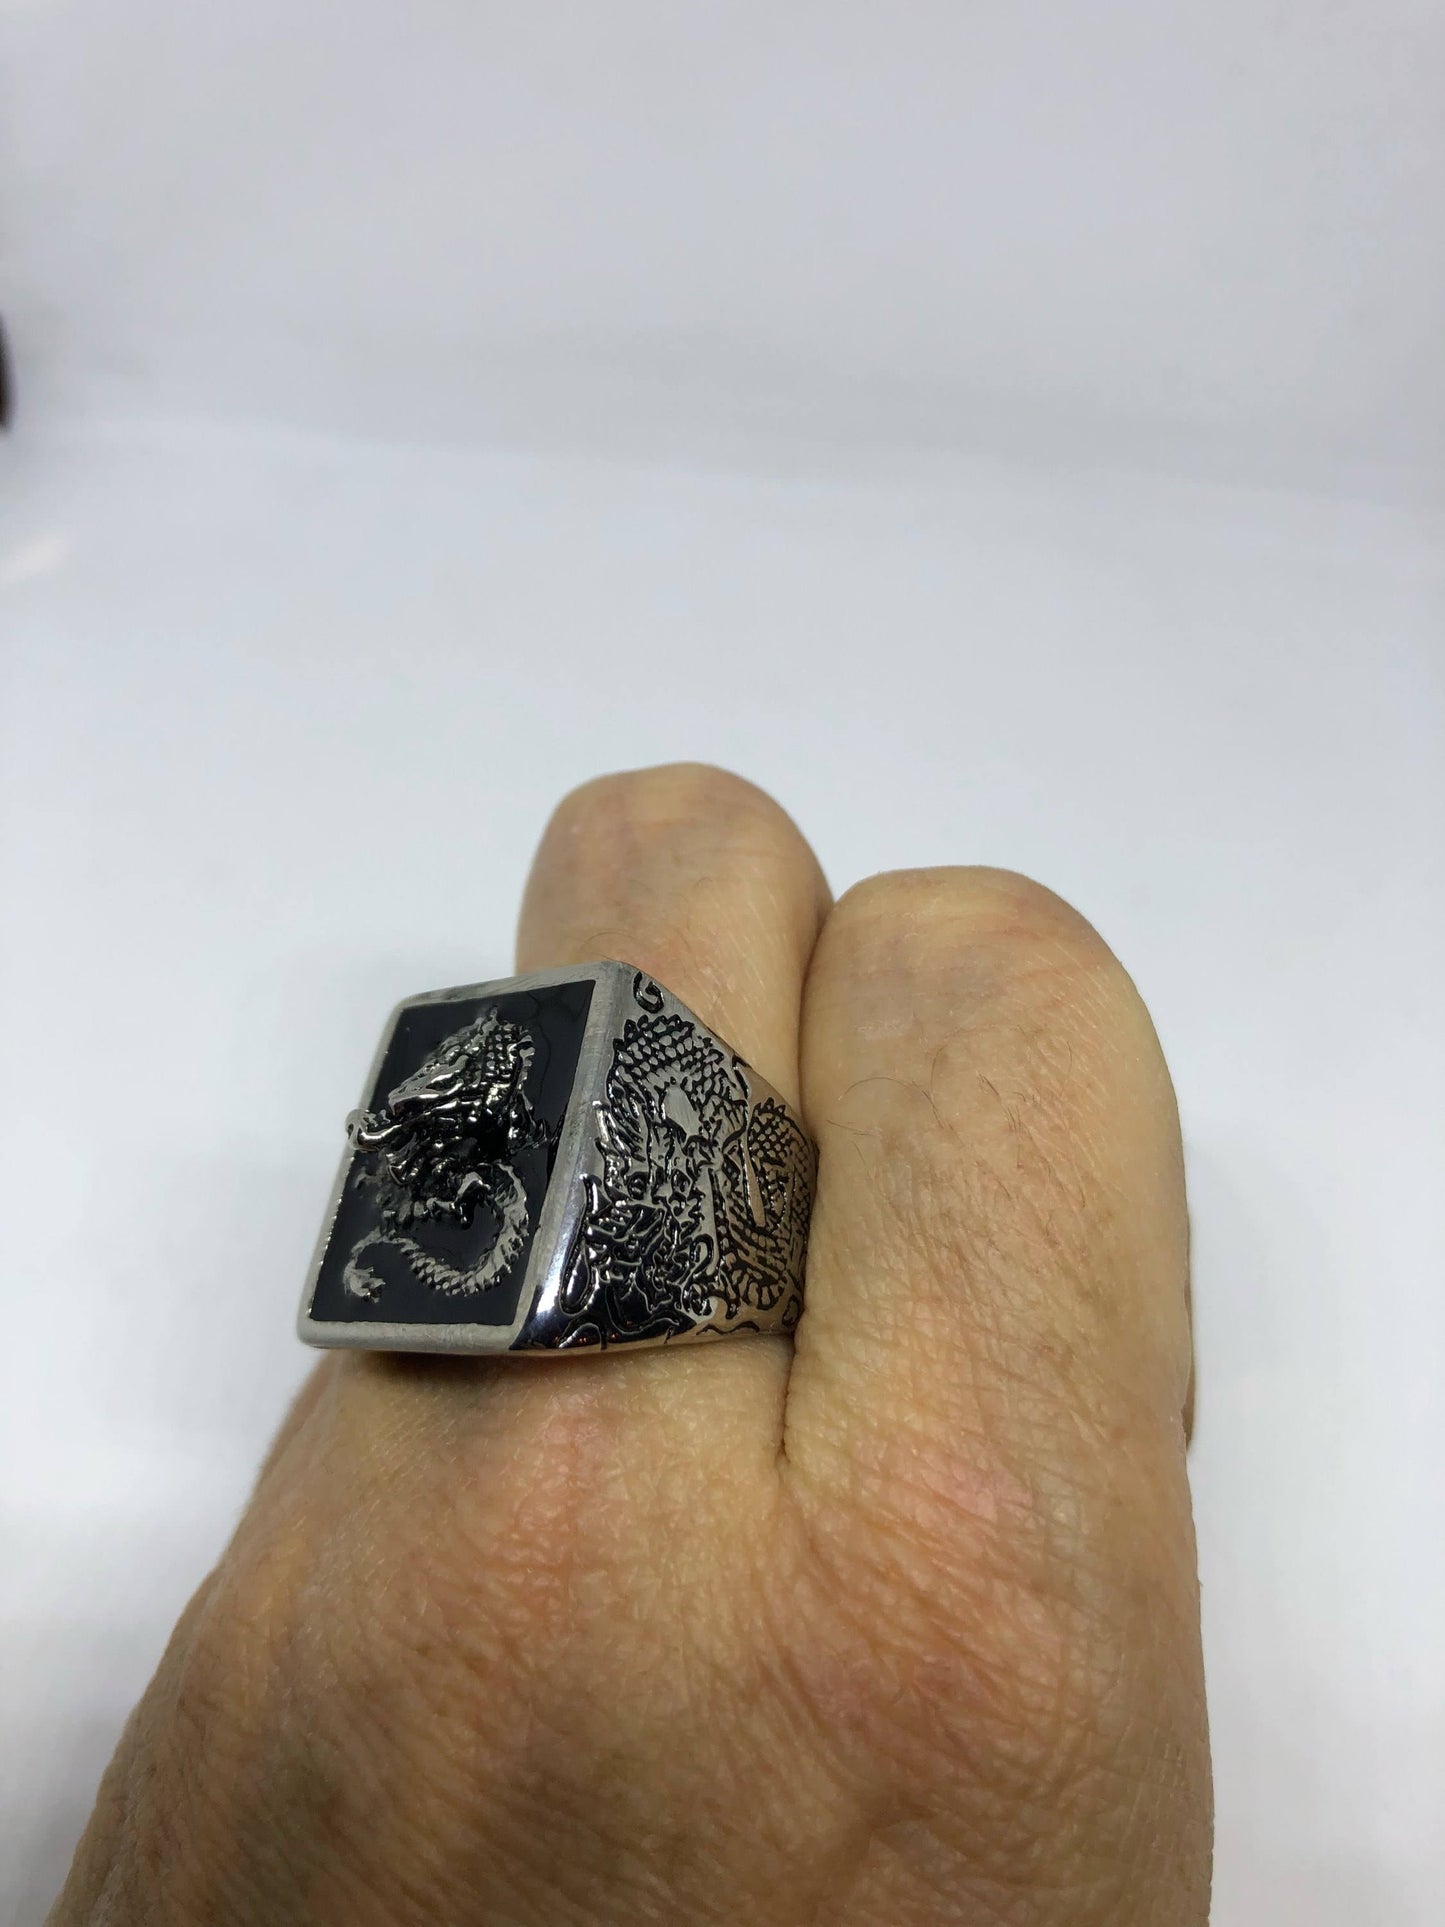 Vintage Gothic Silver Stainless Steel Dragon Mens Ring